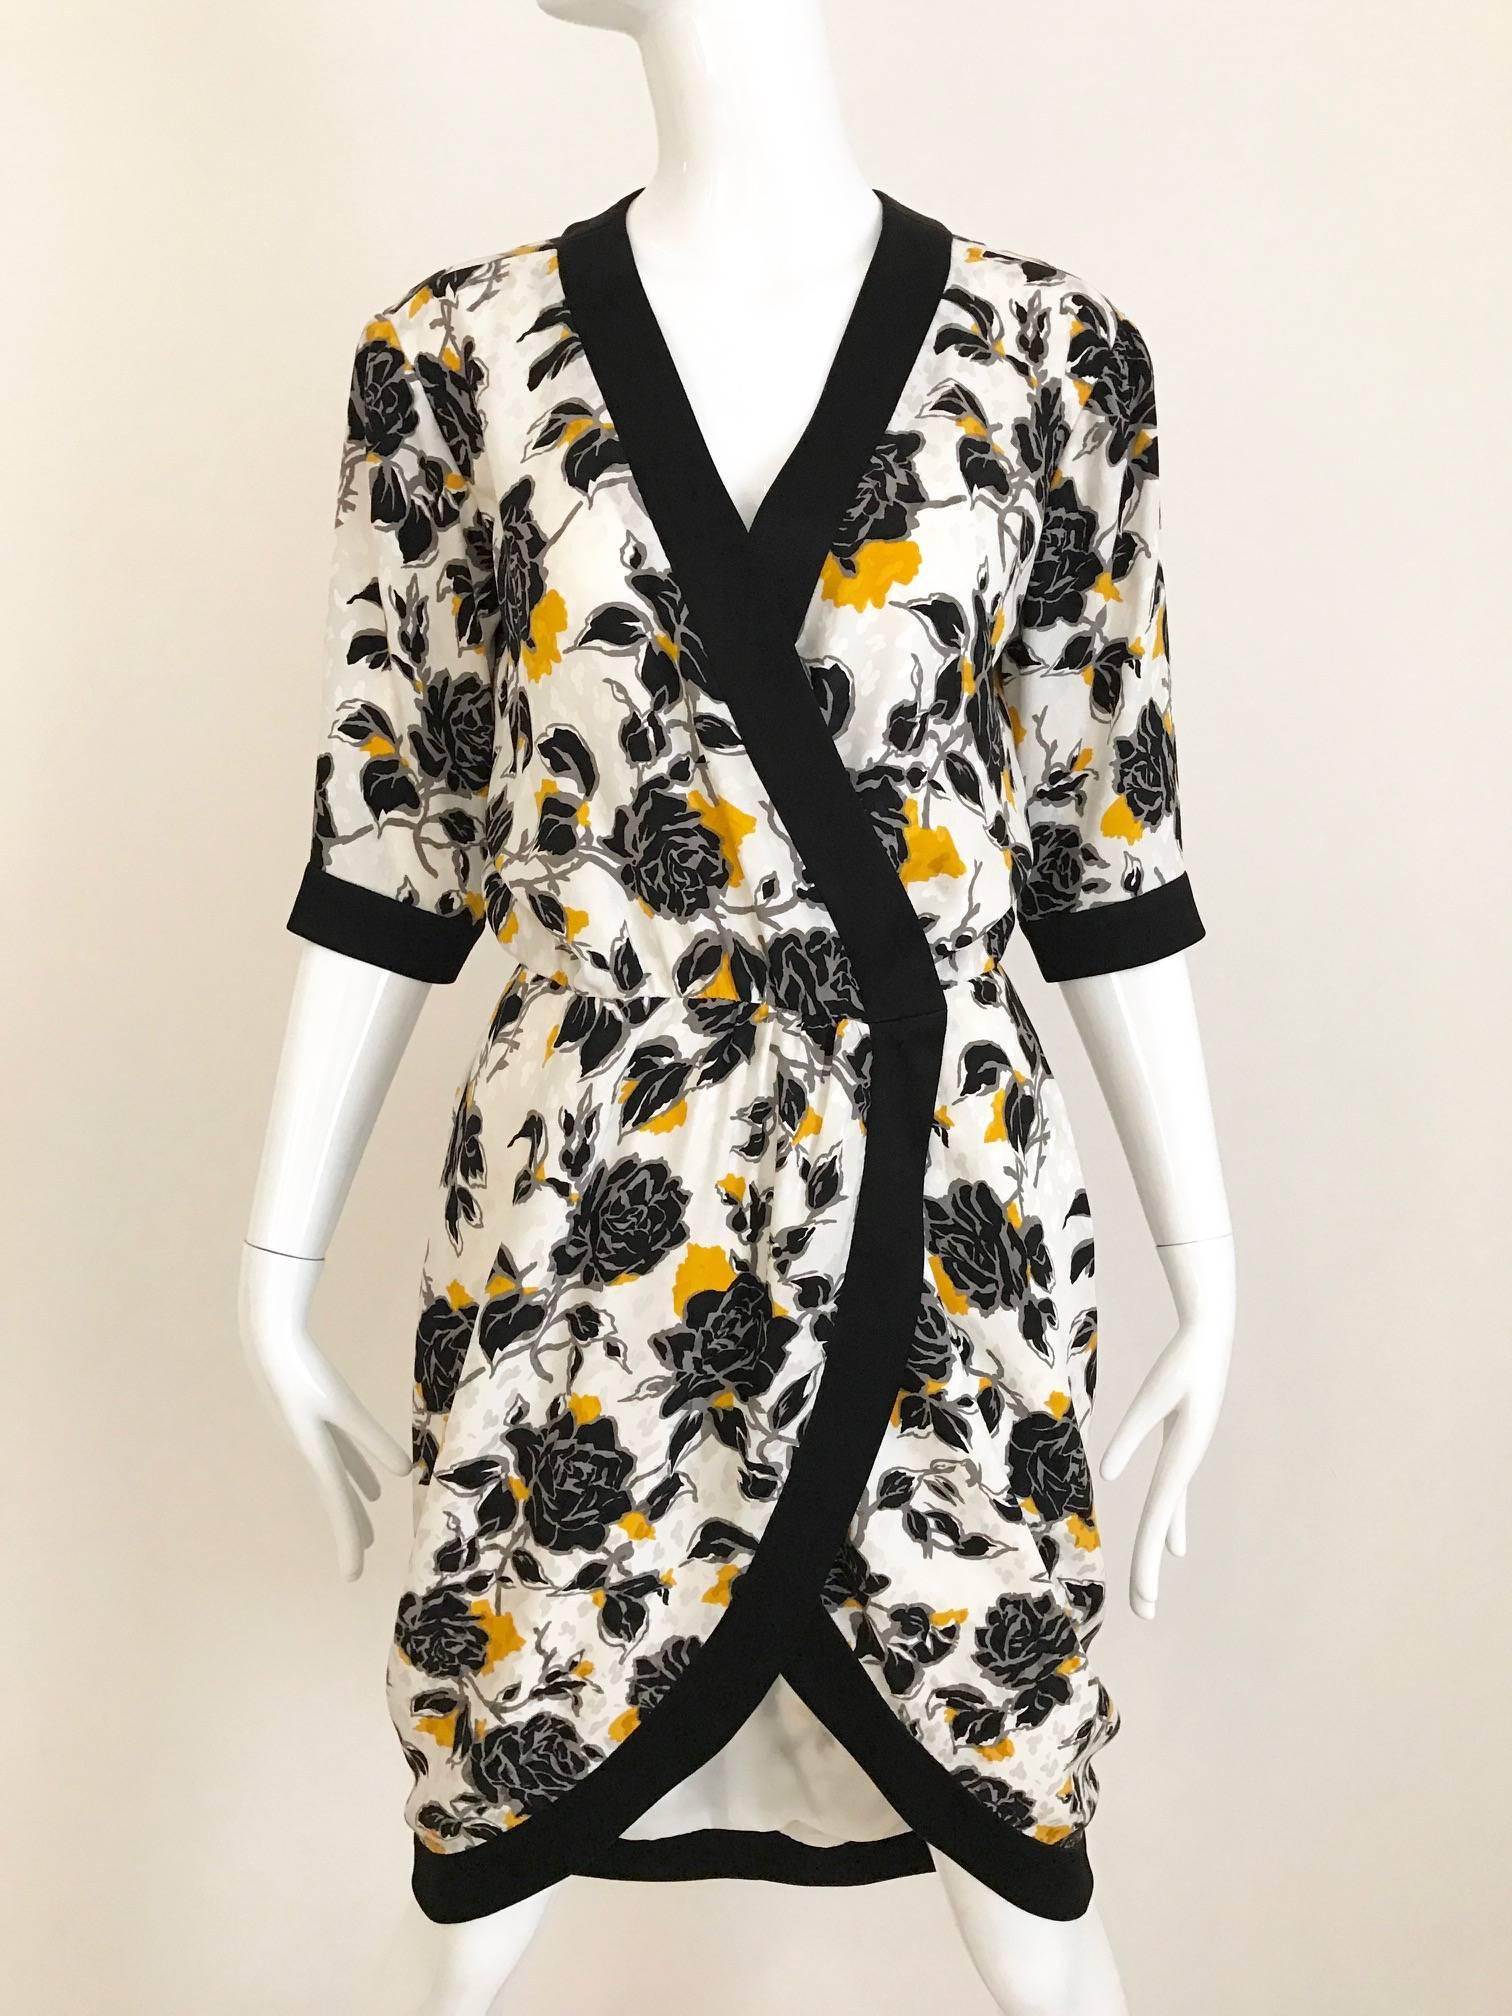 1980s vintage Yves Saint Laurent white, black and yellow rose print silk wrap summer dress. Black silk piping on the sleeves and V neck collar. Hook an eye fastener. 
Dress is styled with vintage Judith leiber adjustable leather belt with star